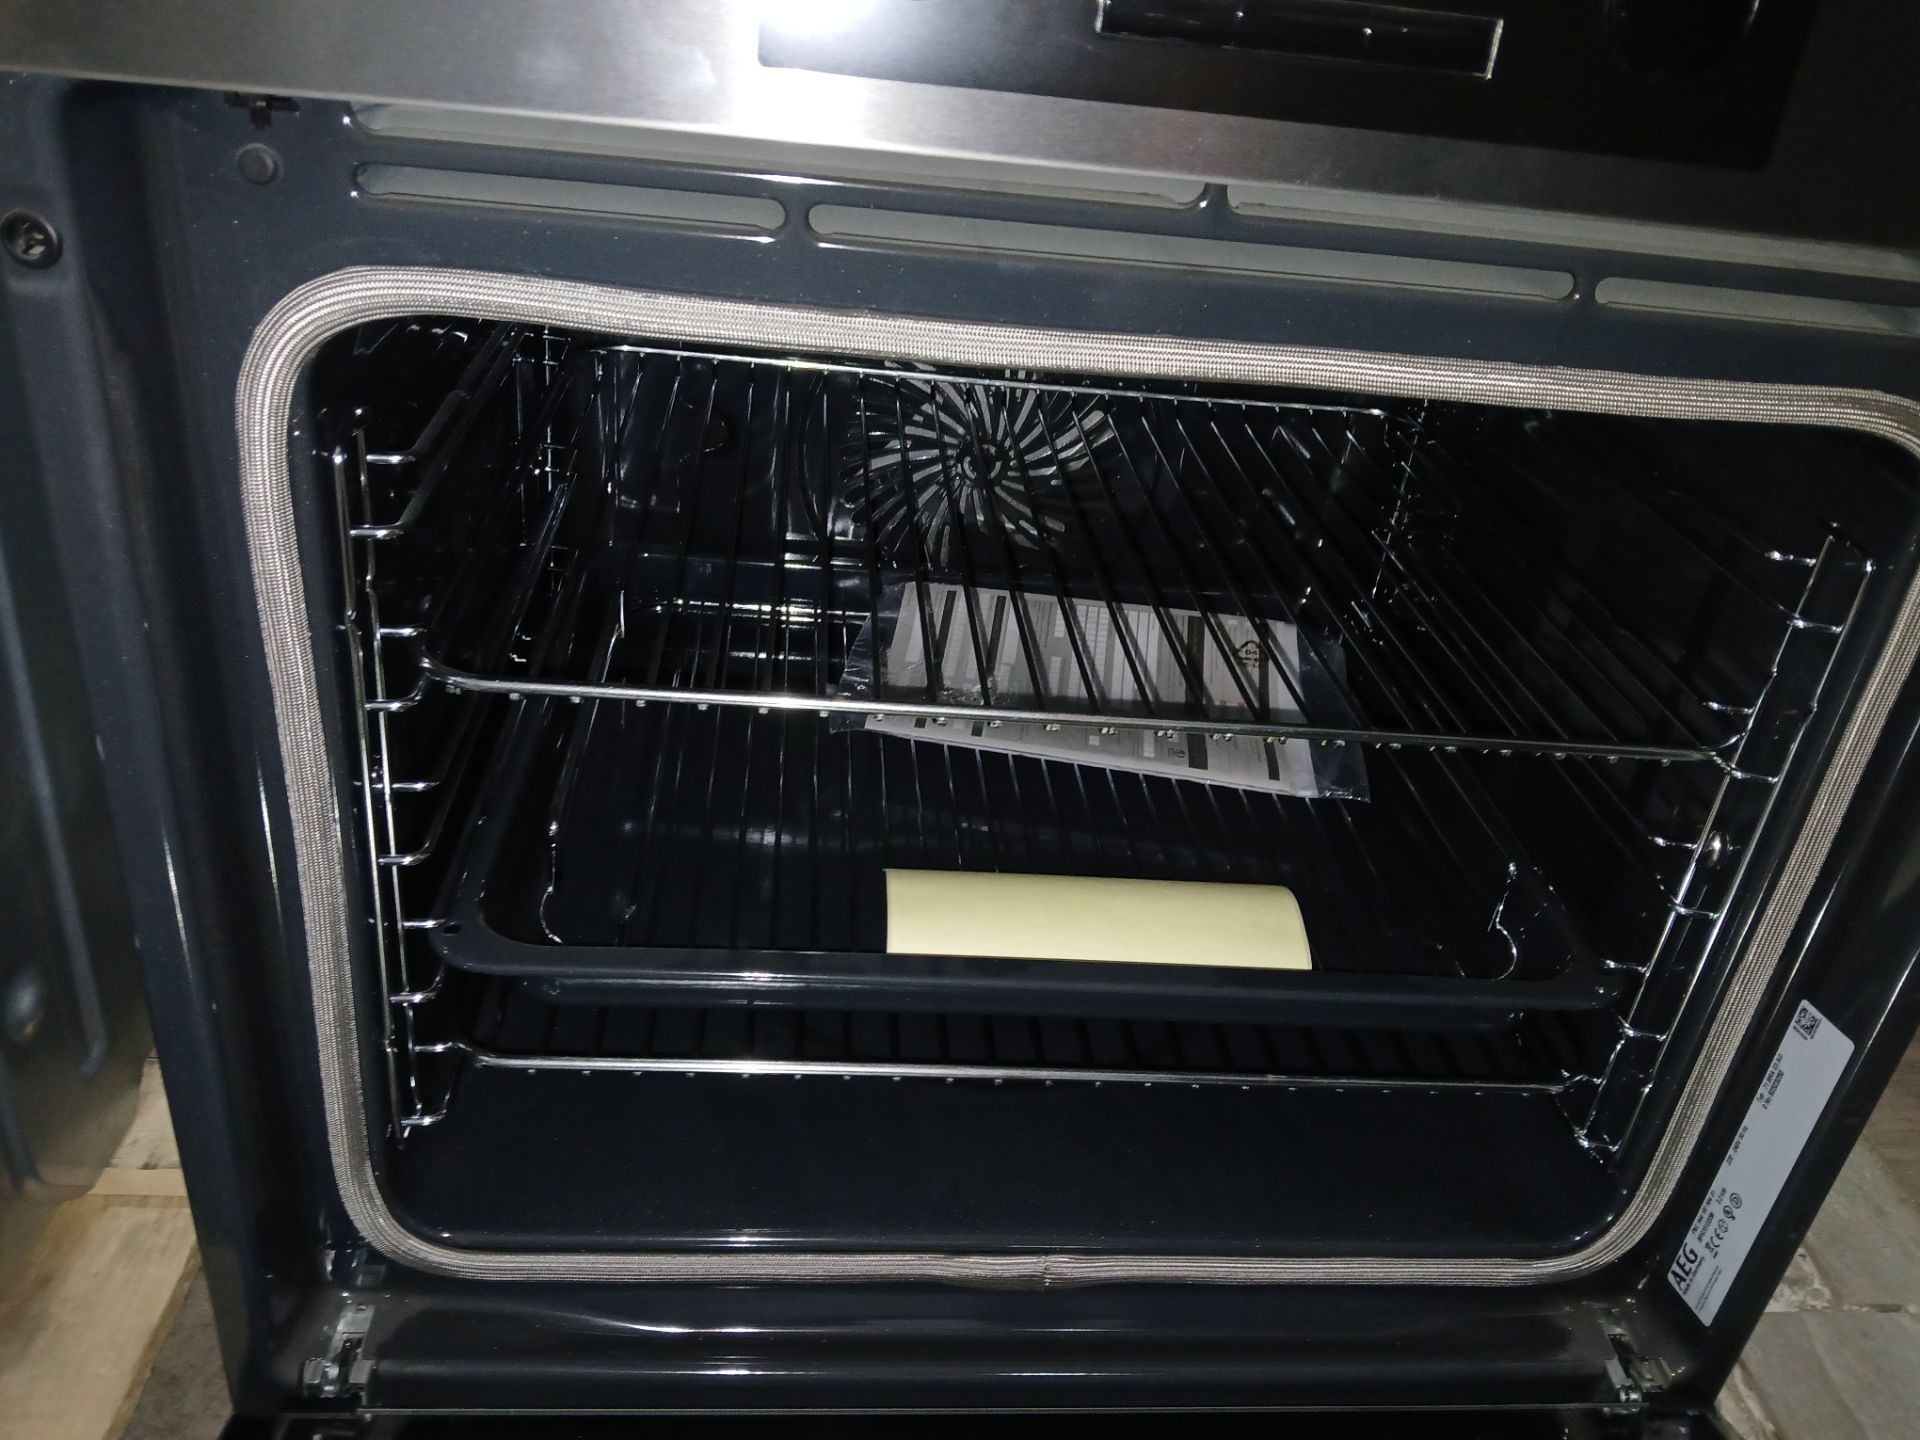 AEG BPS351220M Built-in Single Electric Oven (Please note, Viewing Strongly Recommended - Eddisons - Image 3 of 5